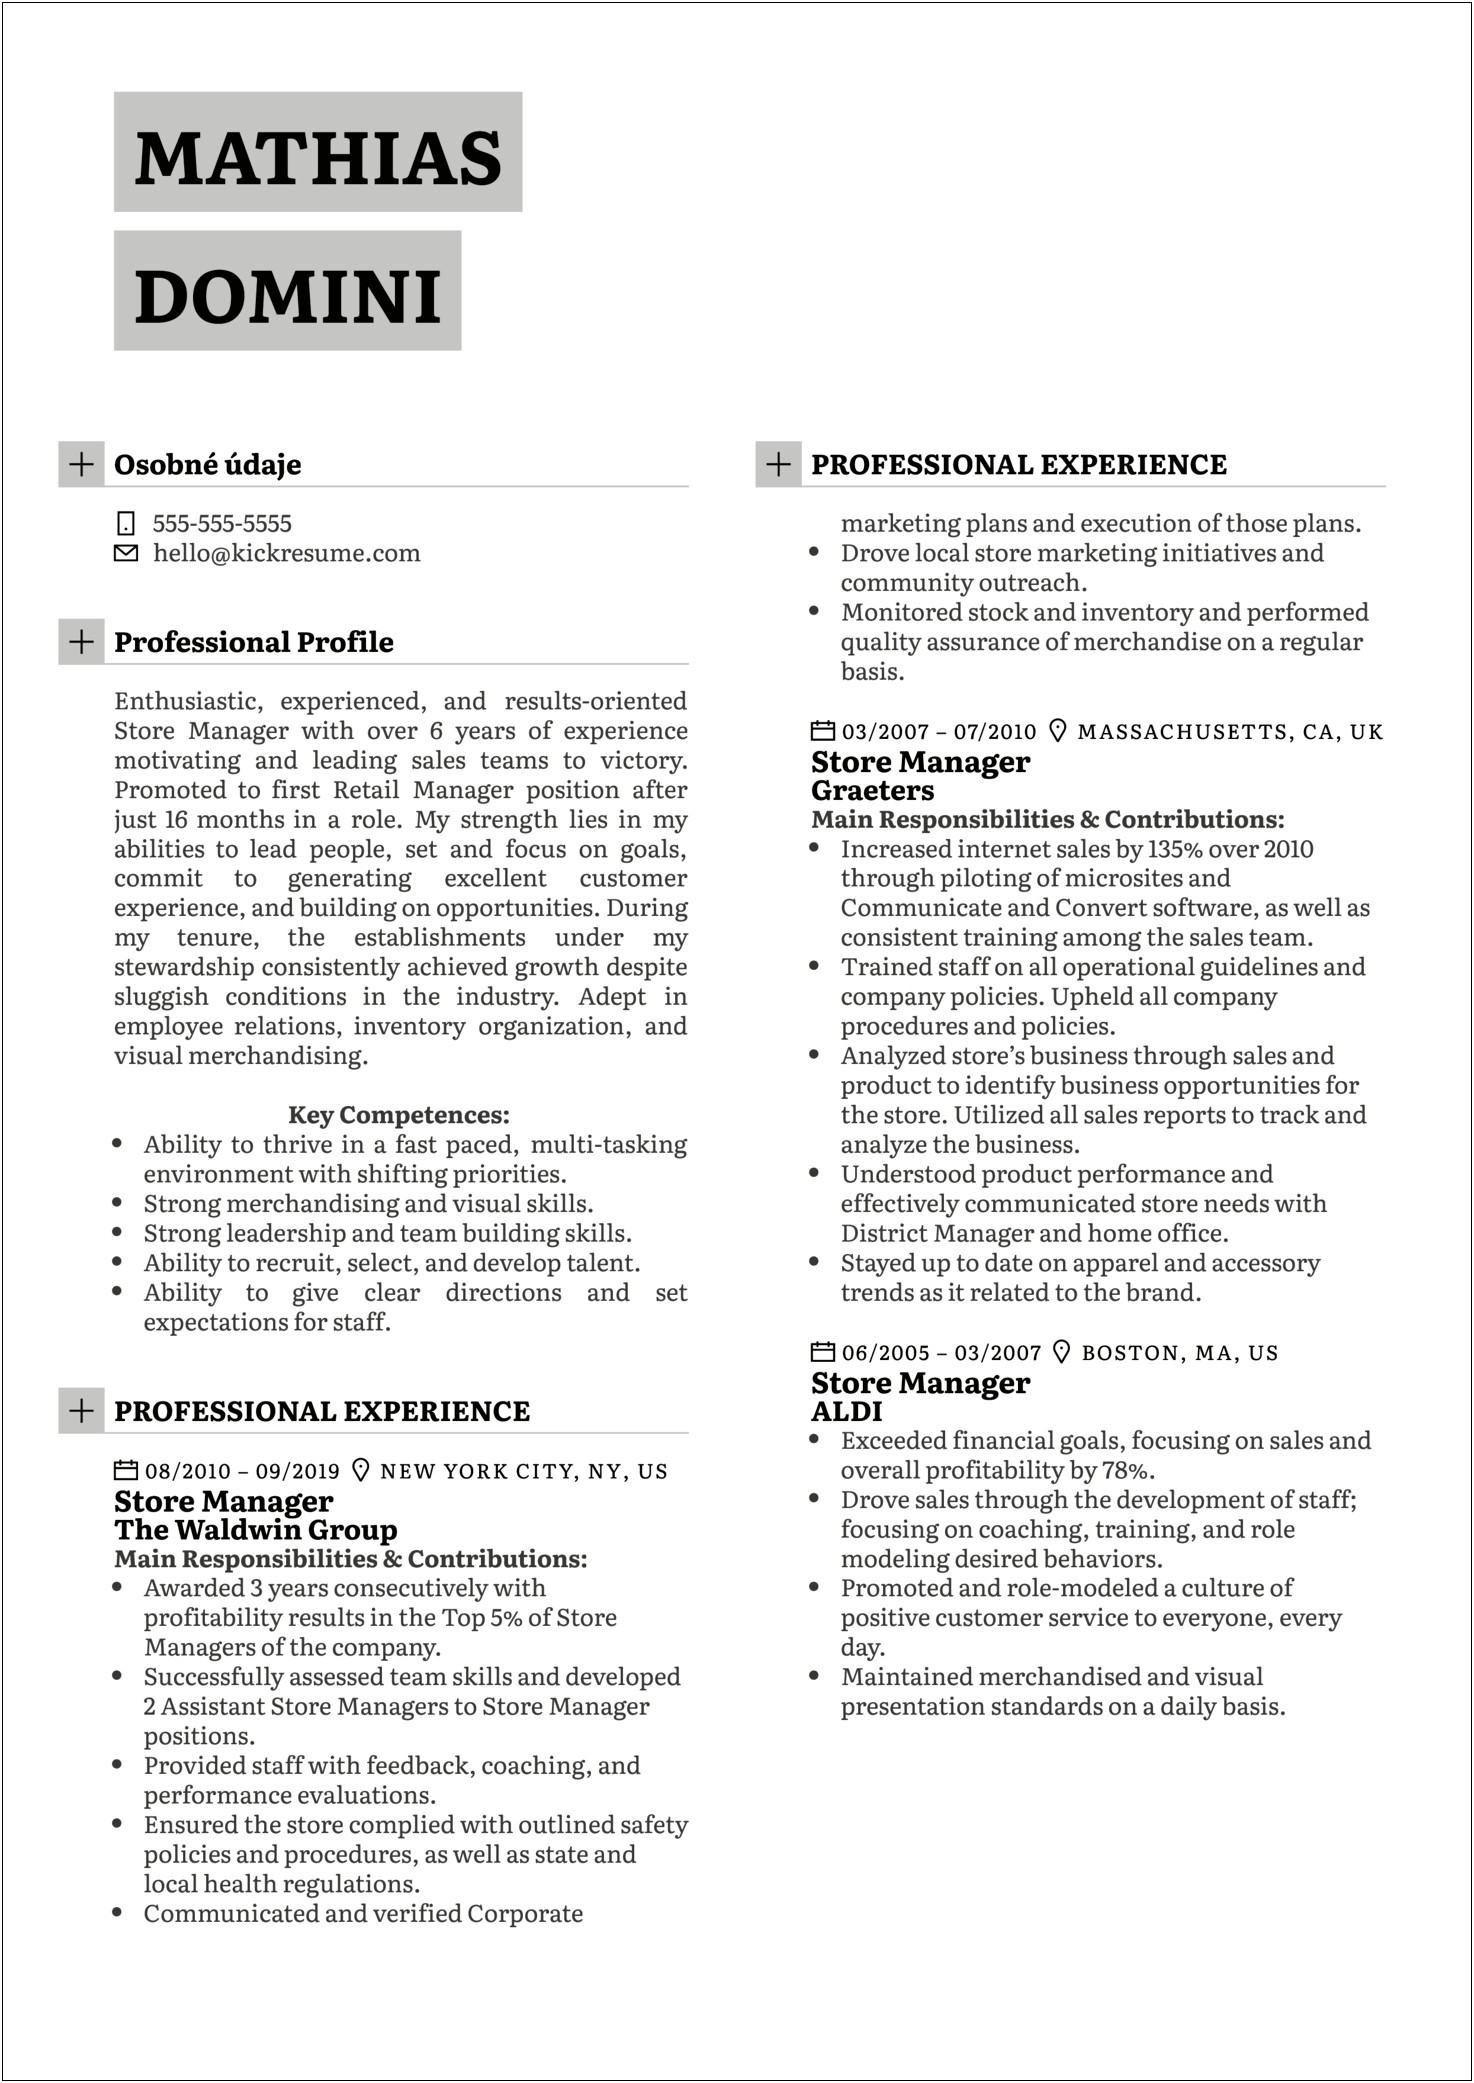 Convenience Store Associate Profile Summary For Resume